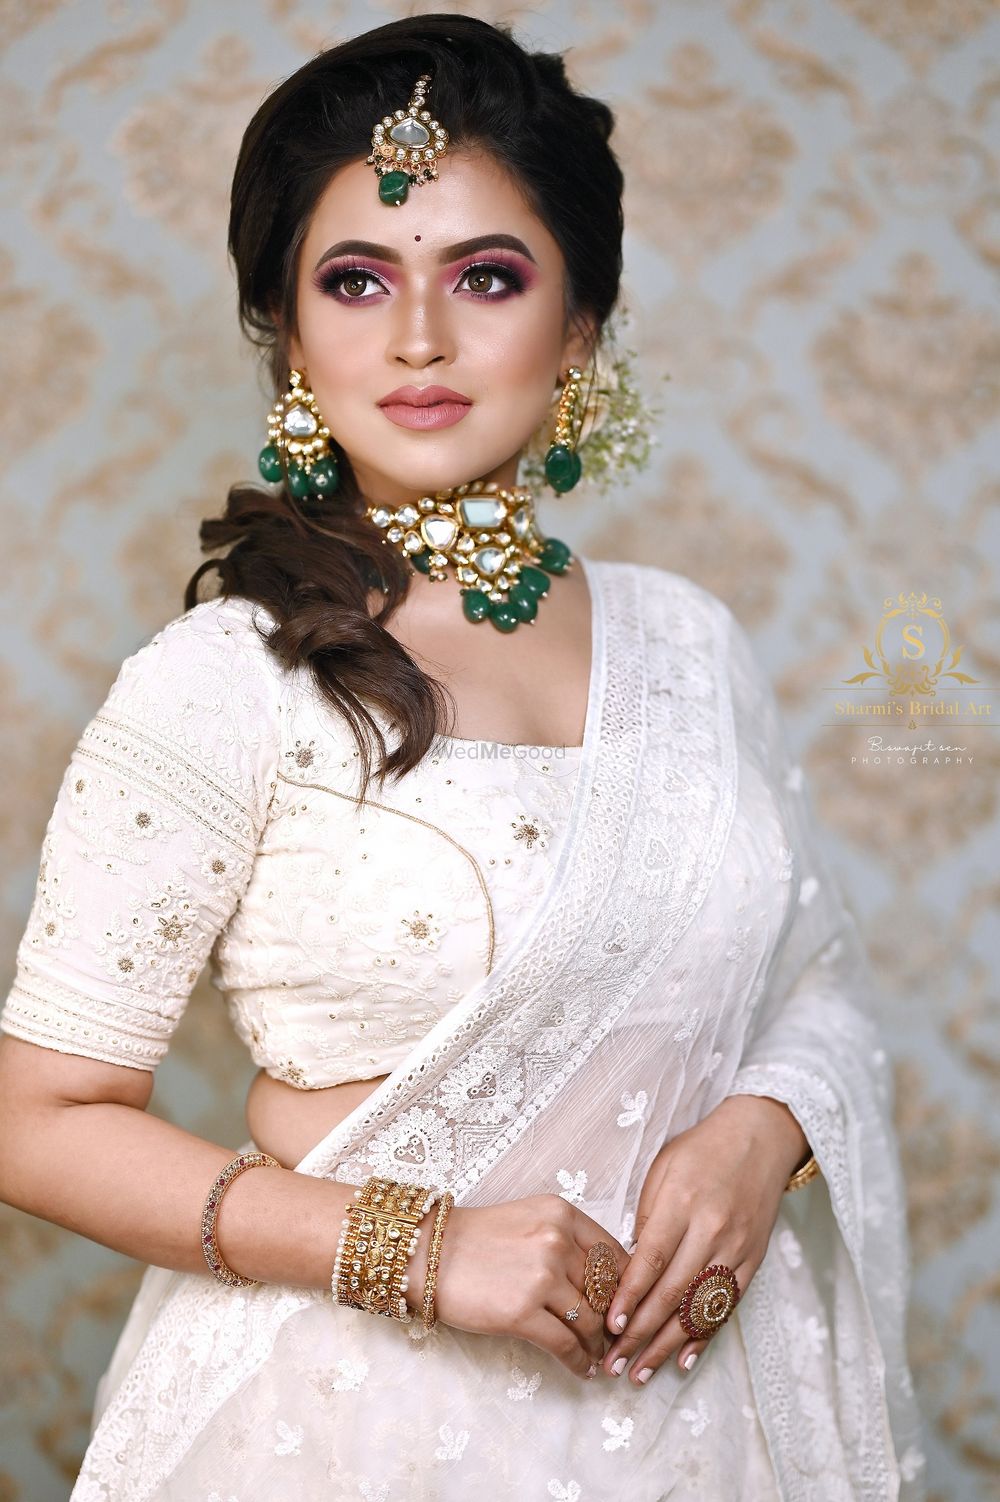 Photo From Engagement Makeup - By Sharmi's Bridal Art